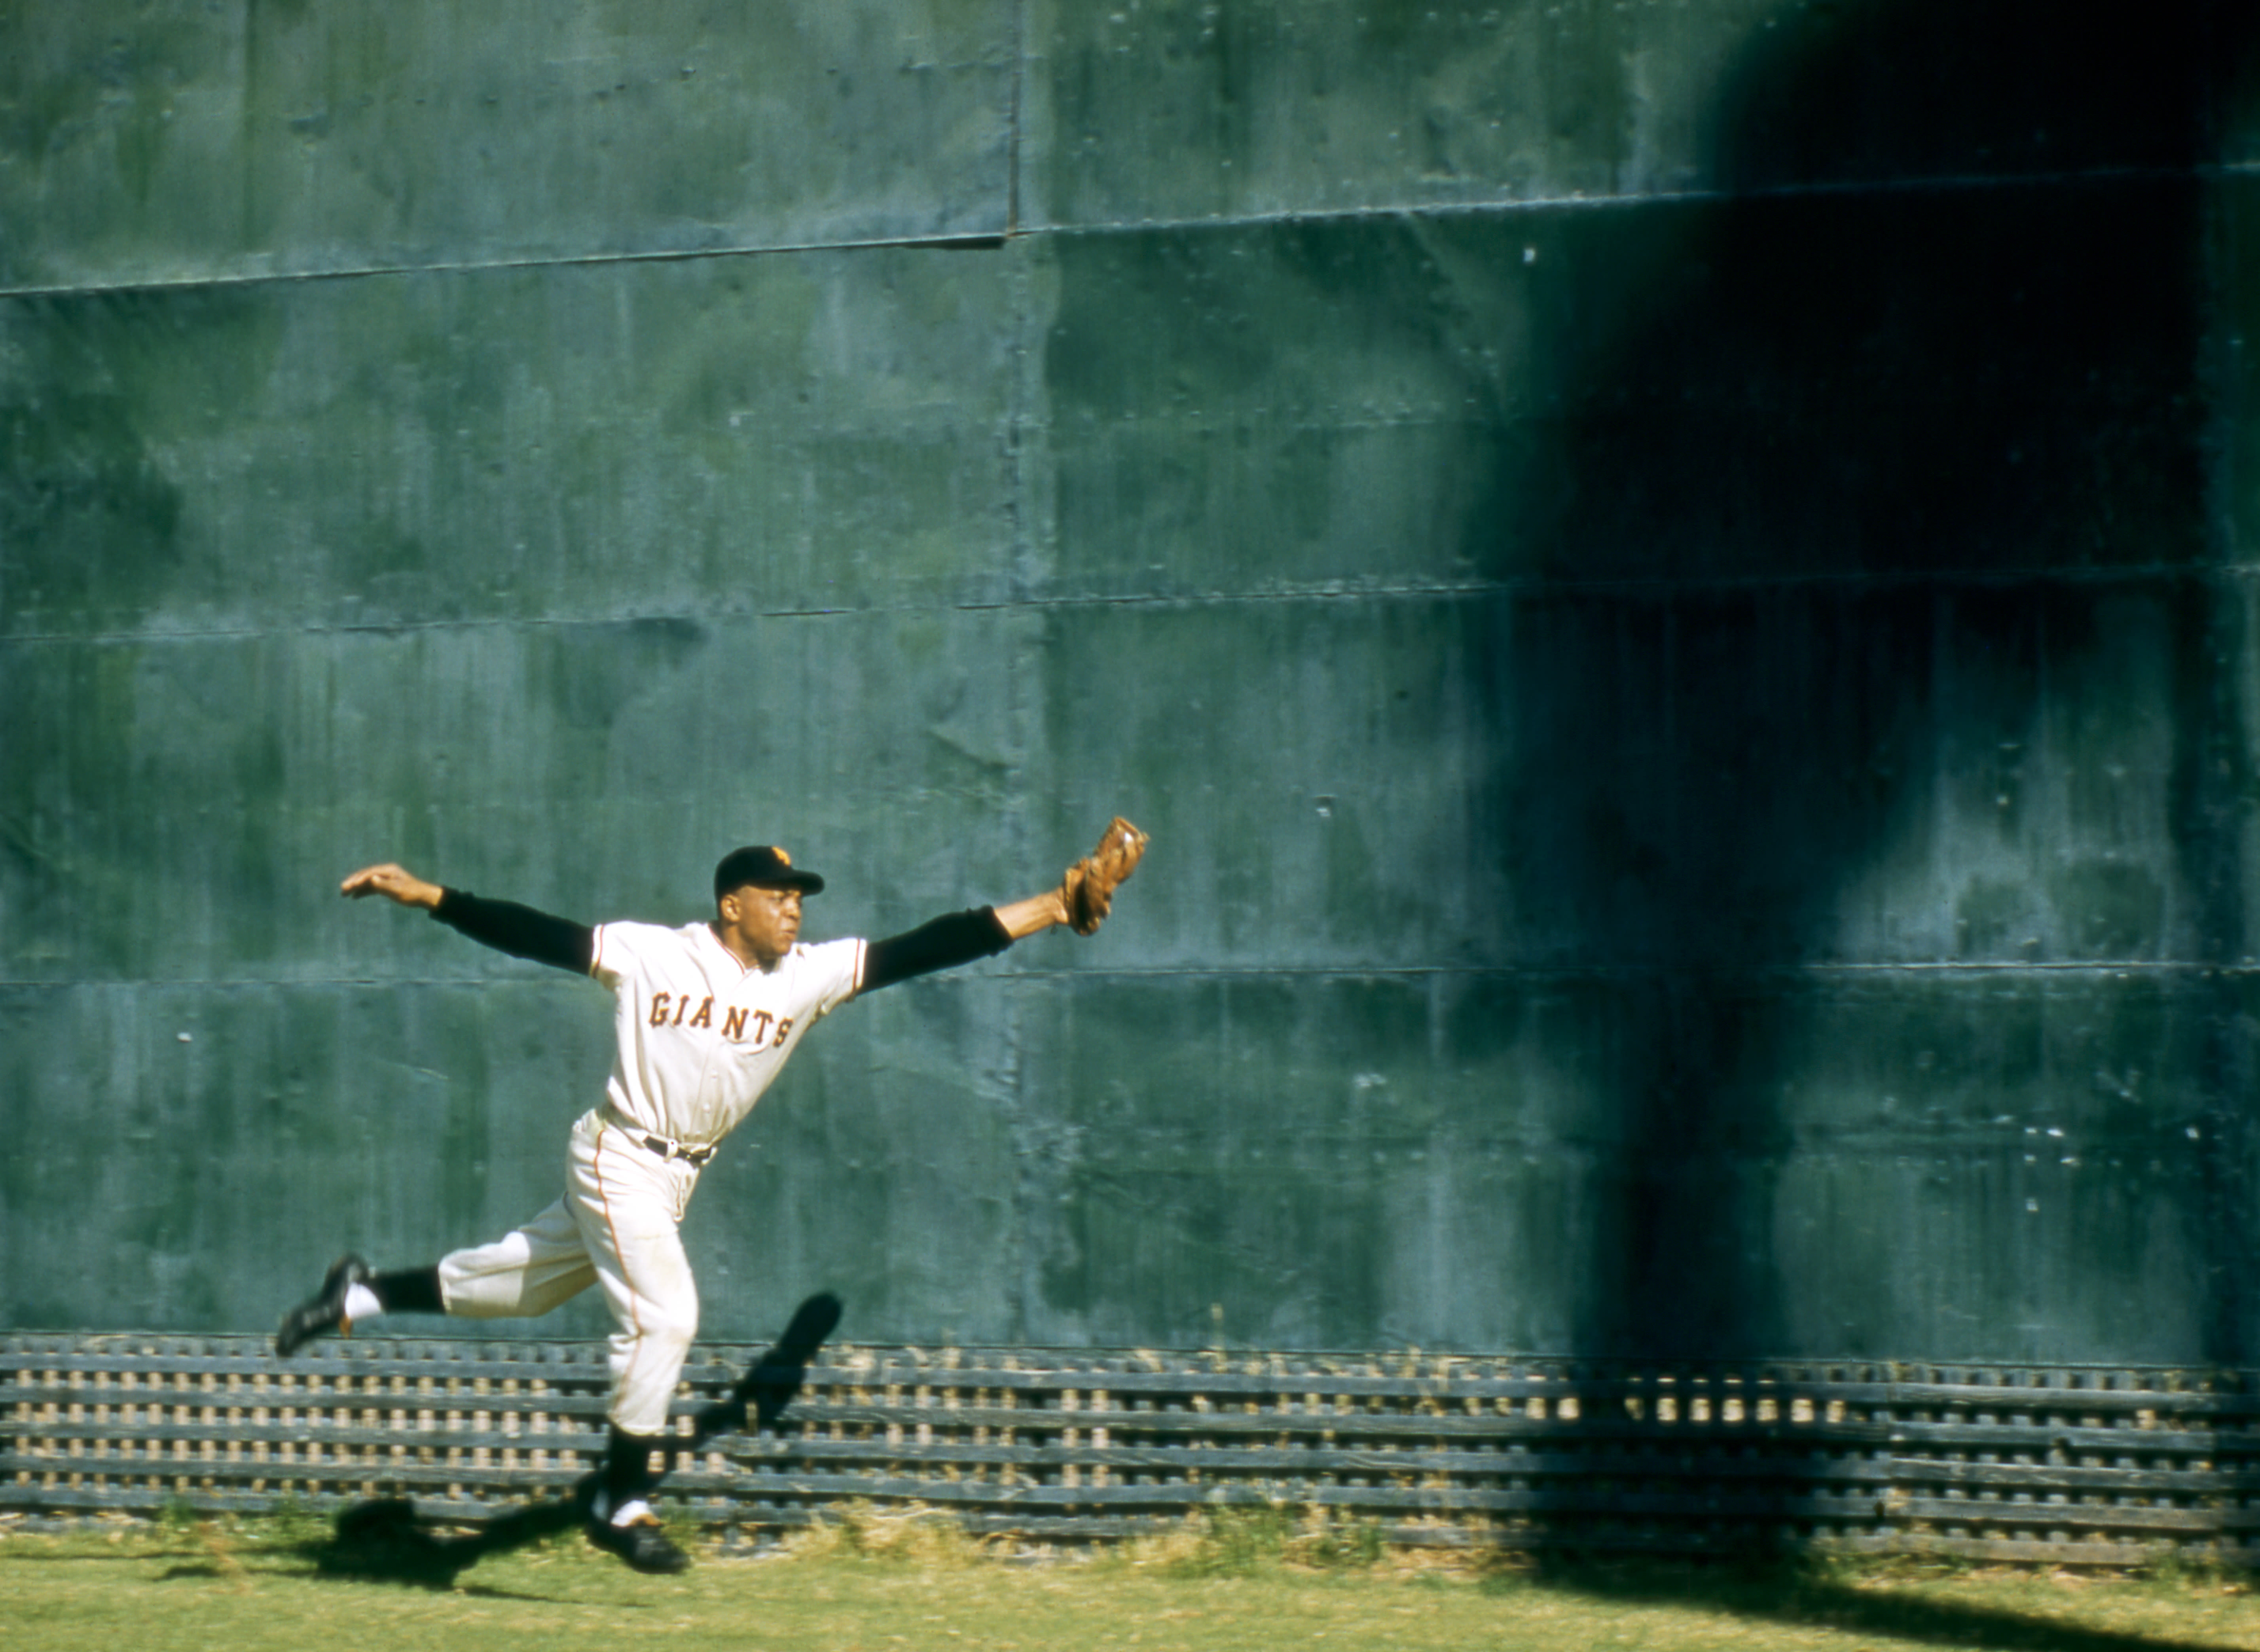 Steve Stone recounts incredible Willie Mays story from joint playing days